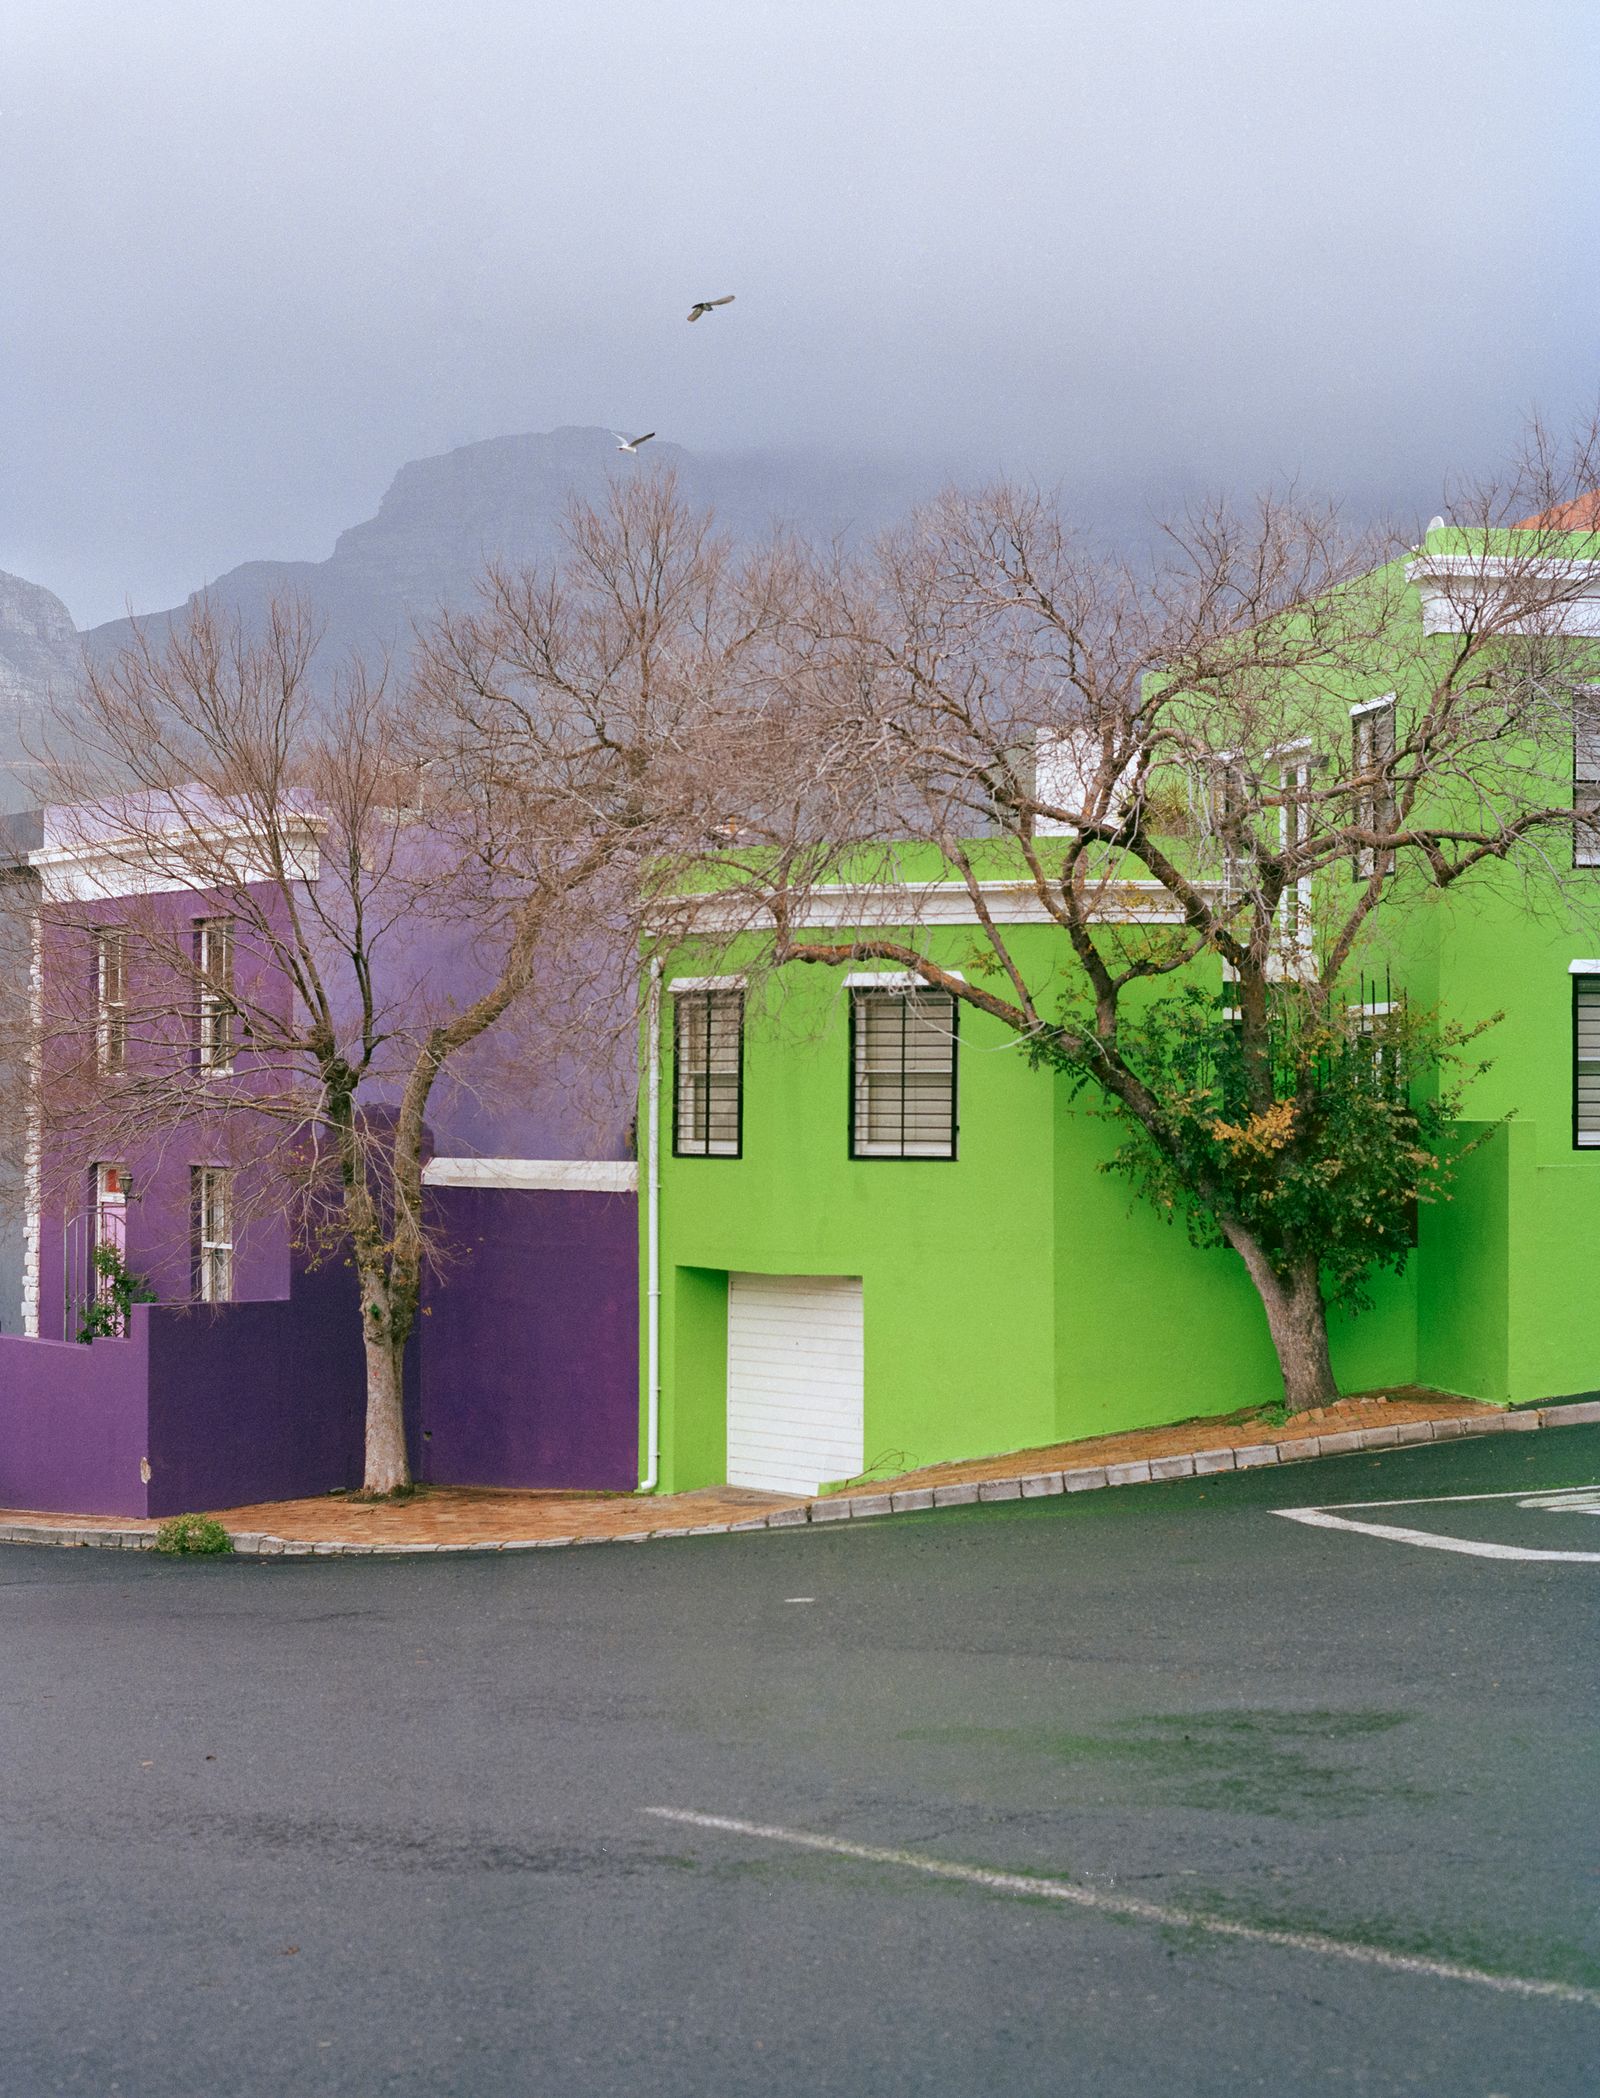 © Ayesha Kazim - Image from the The Bo Kaap Project photography project